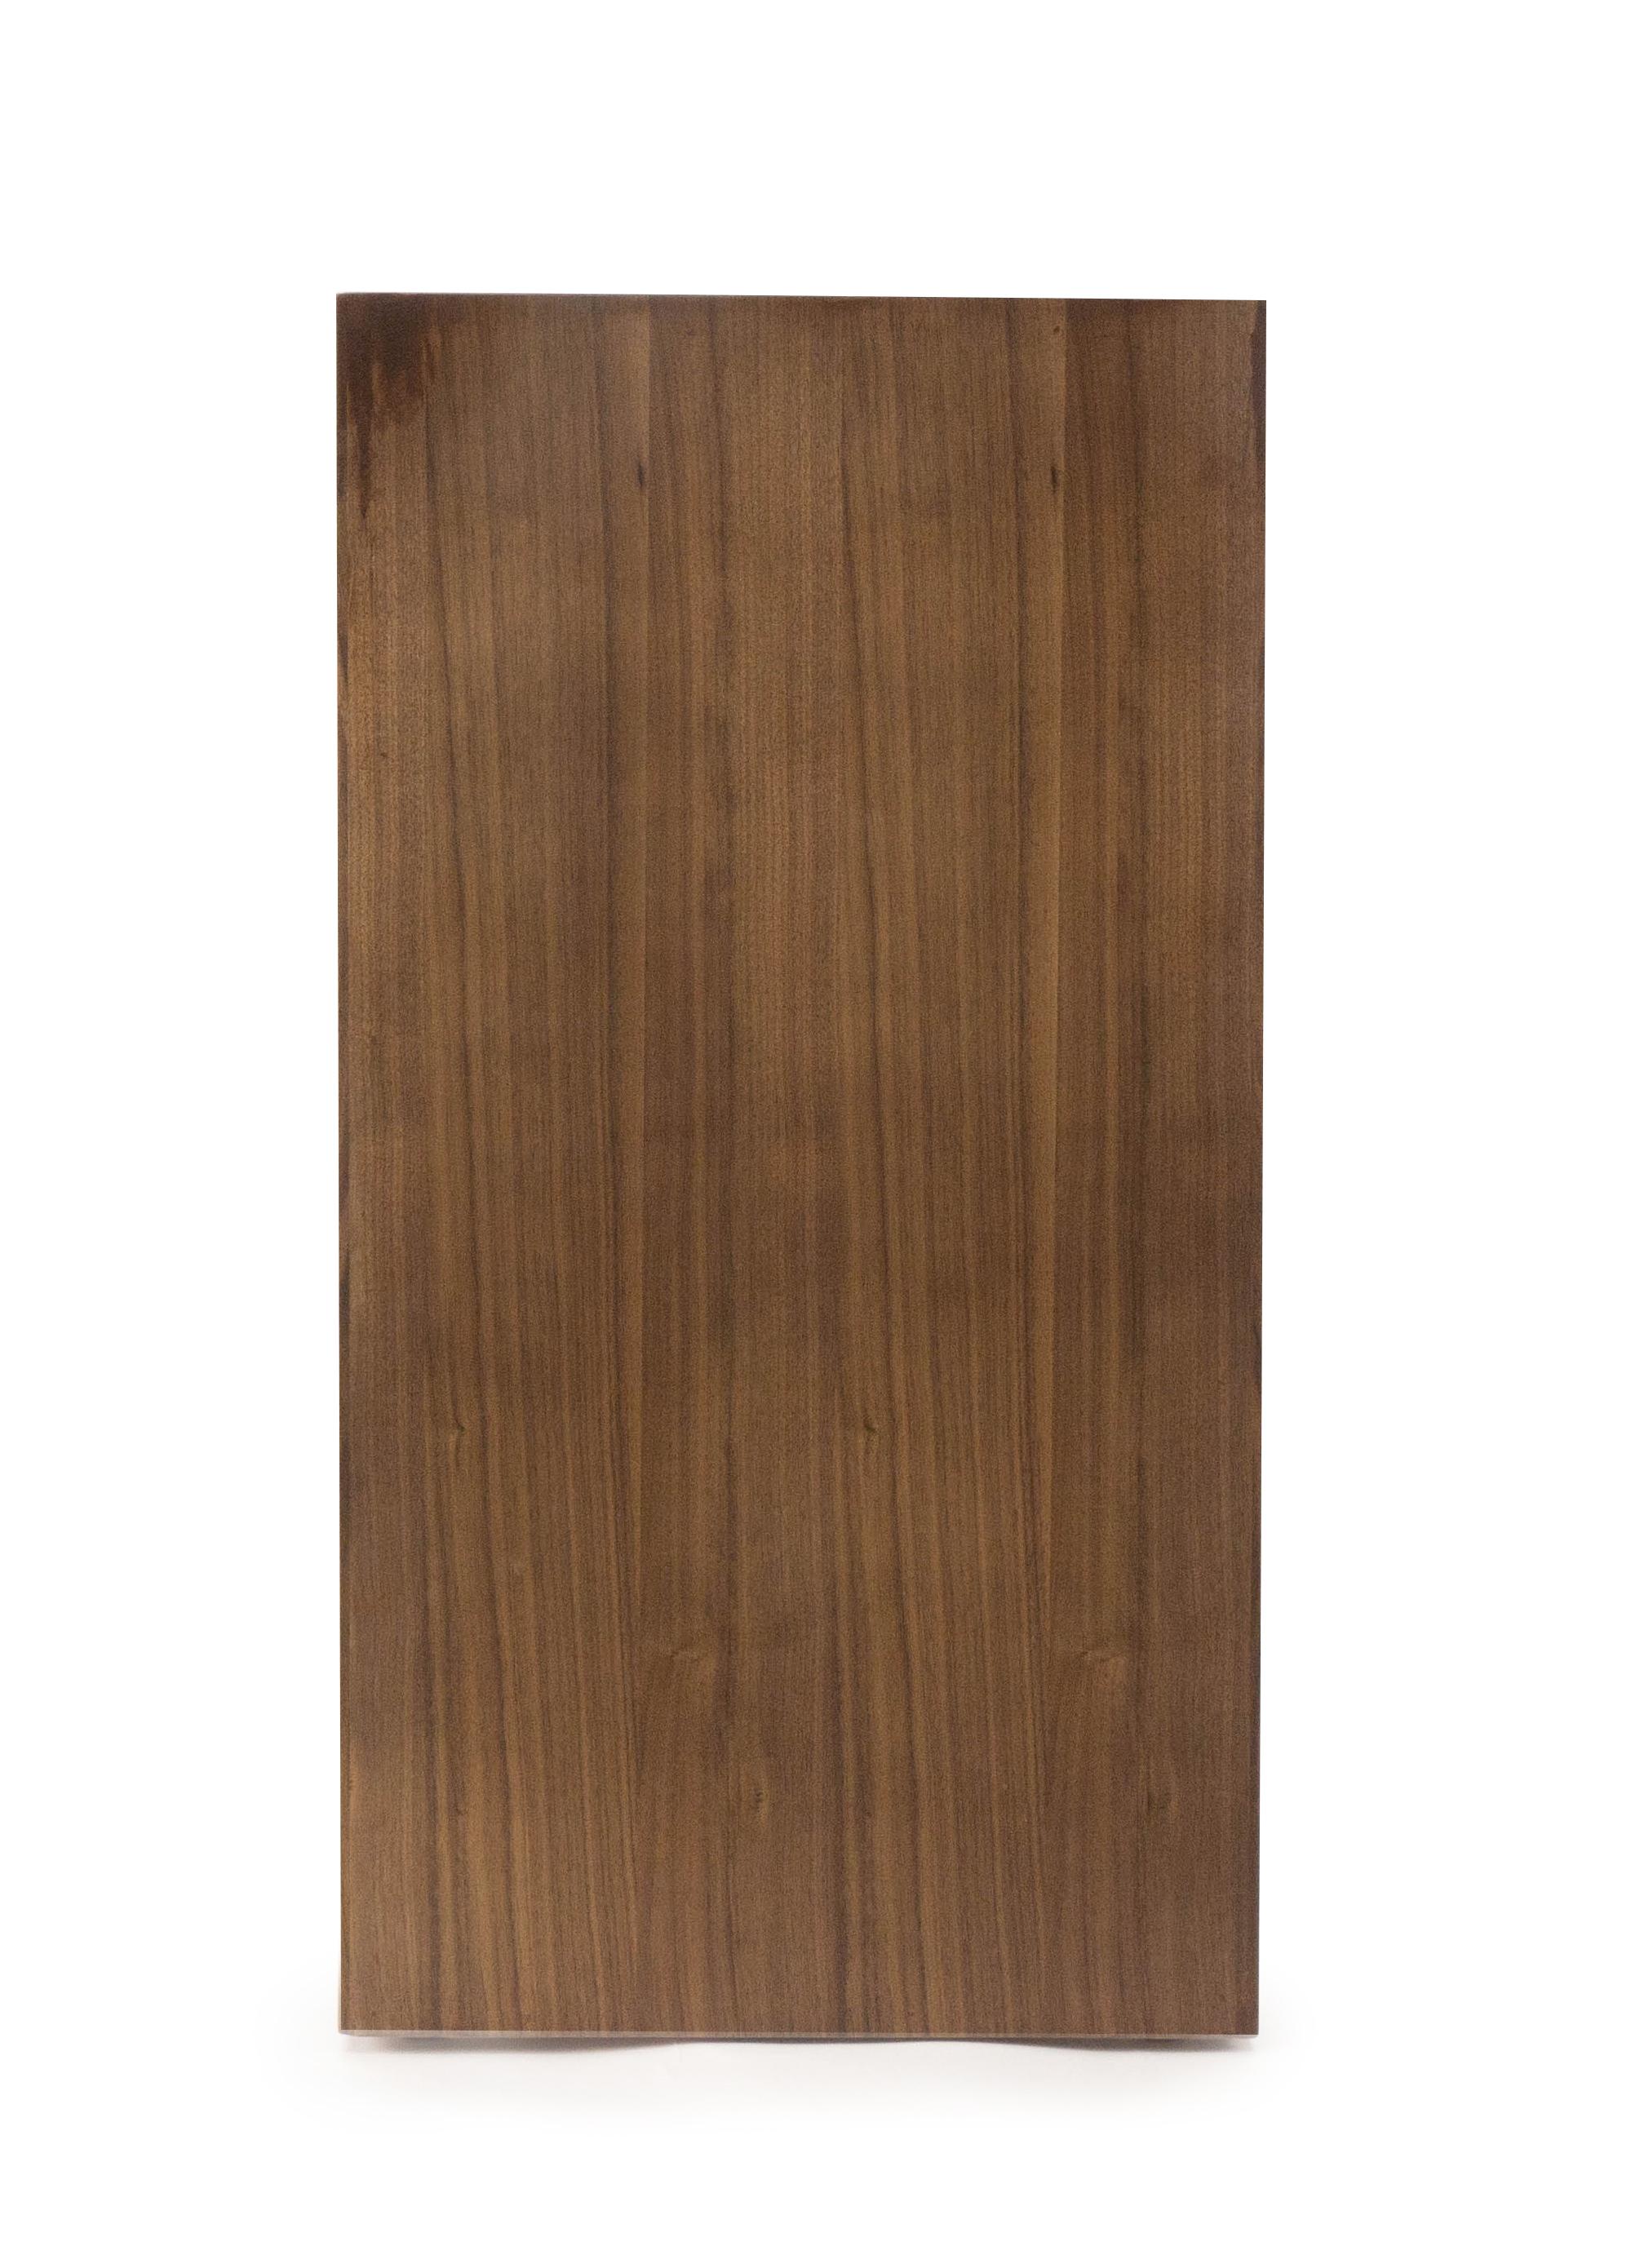 Contemporary Walnut Veneer Waterfall Table For Sale